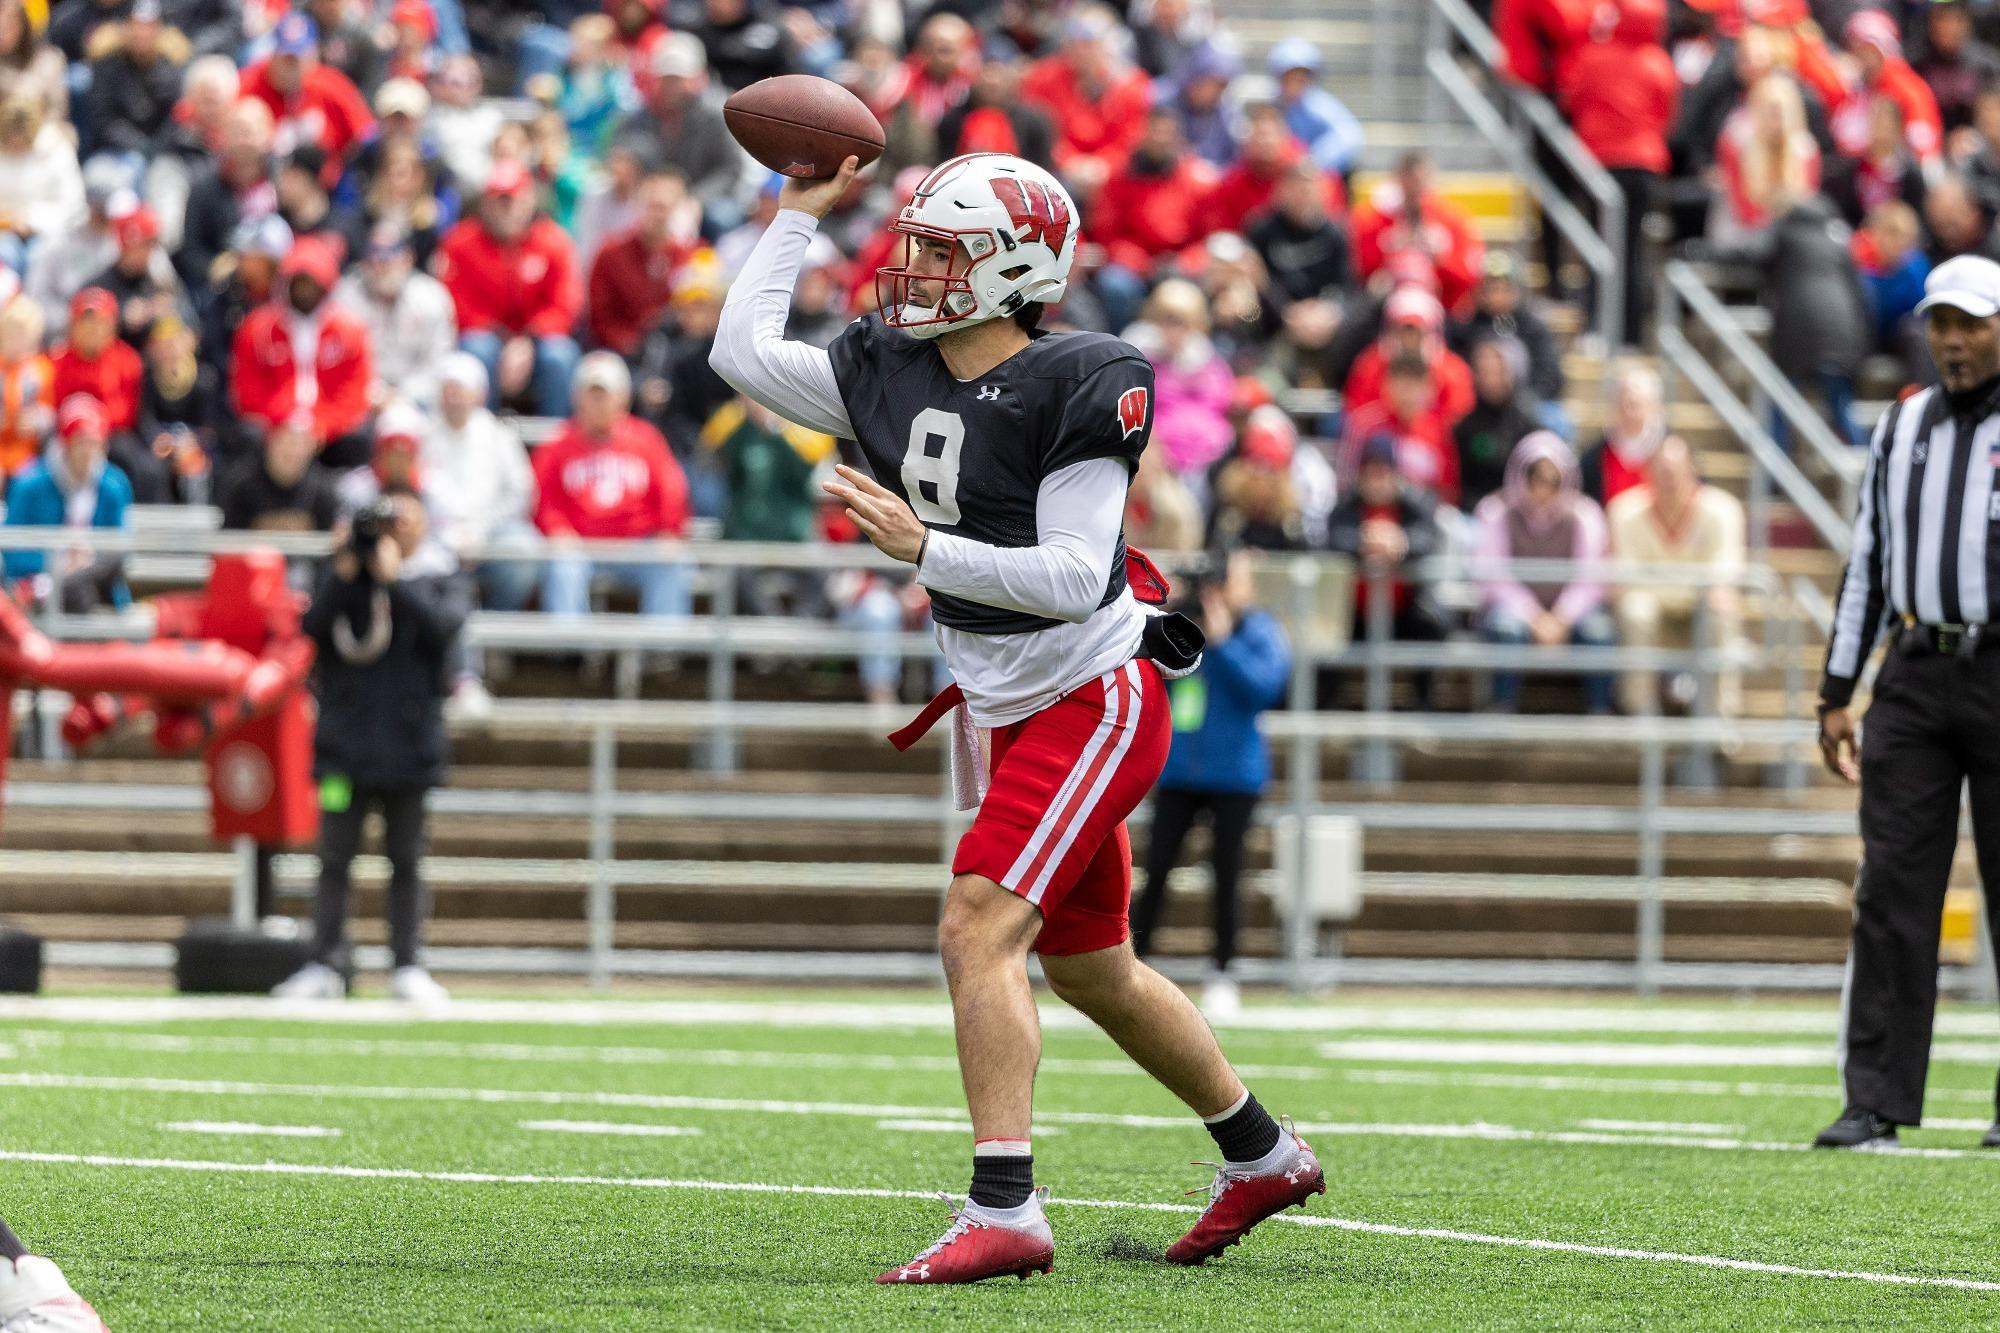 Tanner Mordecai is an accurate passer who transferred to Wisconsin this season from SMU. Senior Hula Bowl scout Mike Bey breaks down Mordecai as an NFL Prospect in his report.